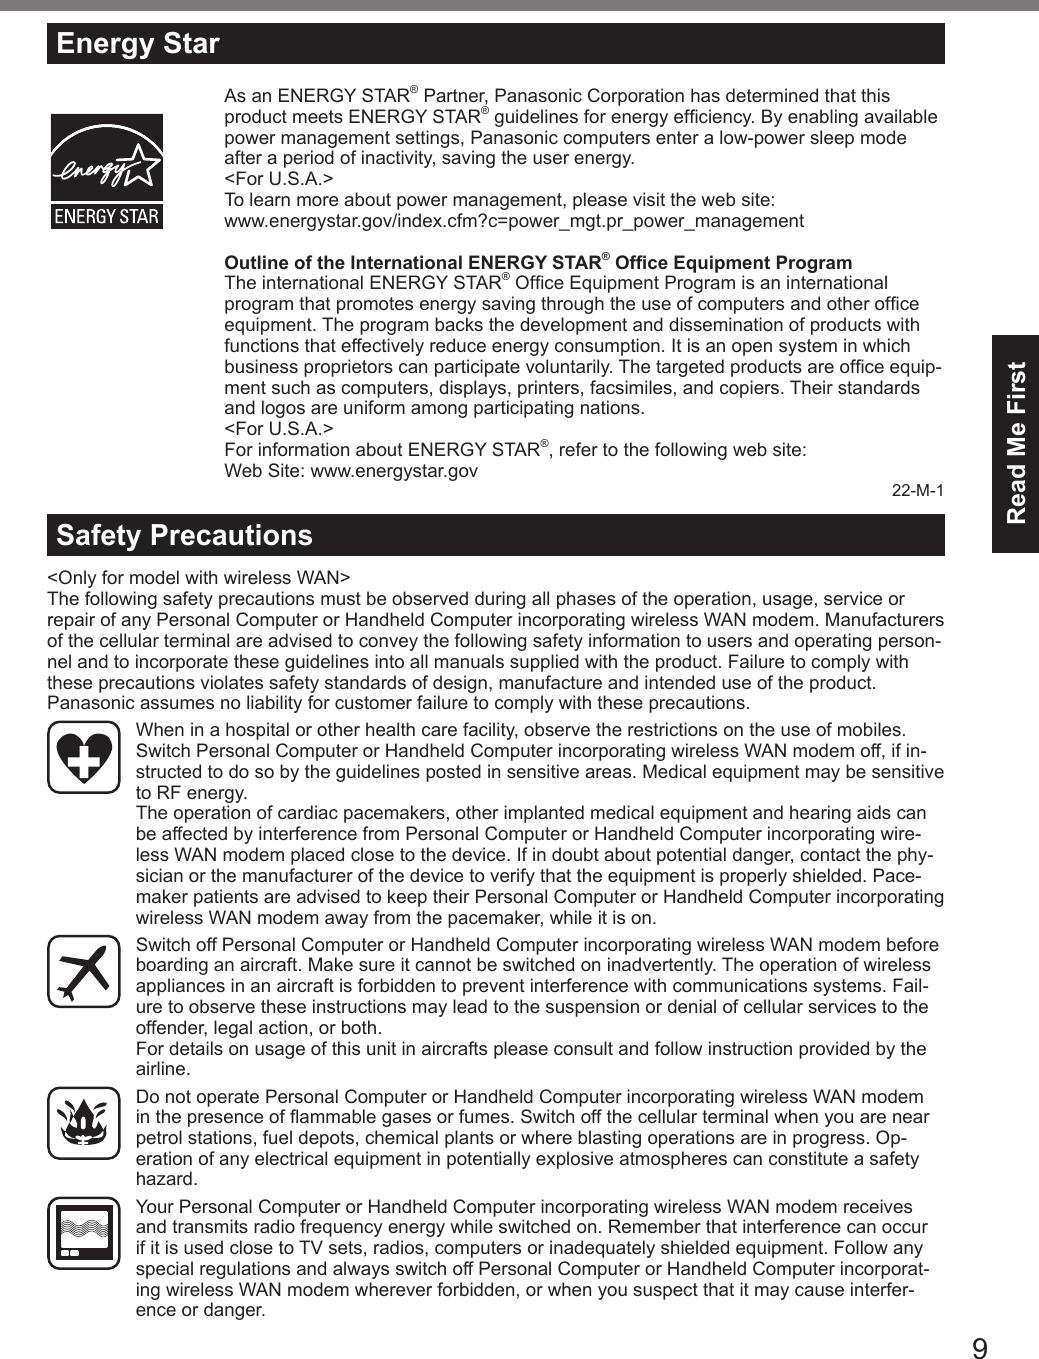 9Read Me First&lt;Only for model with wireless WAN&gt;The following safety precautions must be observed during all phases of the operation, usage, service or repair of any Personal Computer or Handheld Computer incorporating wireless WAN modem. Manufacturers of the cellular terminal are advised to convey the following safety information to users and operating person-nel and to incorporate these guidelines into all manuals supplied with the product. Failure to comply with these precautions violates safety standards of design, manufacture and intended use of the product. Panasonic assumes no liability for customer failure to comply with these precautions.When in a hospital or other health care facility, observe the restrictions on the use of mobiles. Switch Personal Computer or Handheld Computer incorporating wireless WAN modem off, if in-structed to do so by the guidelines posted in sensitive areas. Medical equipment may be sensitive to RF energy. The operation of cardiac pacemakers, other implanted medical equipment and hearing aids can be affected by interference from Personal Computer or Handheld Computer incorporating wire-less WAN modem placed close to the device. If in doubt about potential danger, contact the phy-sician or the manufacturer of the device to verify that the equipment is properly shielded. Pace-maker patients are advised to keep their Personal Computer or Handheld Computer incorporating wireless WAN modem away from the pacemaker, while it is on.Switch off Personal Computer or Handheld Computer incorporating wireless WAN modem before boarding an aircraft. Make sure it cannot be switched on inadvertently. The operation of wireless appliances in an aircraft is forbidden to prevent interference with communications systems. Fail-ure to observe these instructions may lead to the suspension or denial of cellular services to the offender, legal action, or both. For details on usage of this unit in aircrafts please consult and follow instruction provided by the airline.Do not operate Personal Computer or Handheld Computer incorporating wireless WAN modem in the presence of ammable gases or fumes. Switch off the cellular terminal when you are near petrol stations, fuel depots, chemical plants or where blasting operations are in progress. Op-eration of any electrical equipment in potentially explosive atmospheres can constitute a safety hazard.Your Personal Computer or Handheld Computer incorporating wireless WAN modem receives and transmits radio frequency energy while switched on. Remember that interference can occur if it is used close to TV sets, radios, computers or inadequately shielded equipment. Follow any special regulations and always switch off Personal Computer or Handheld Computer incorporat-ing wireless WAN modem wherever forbidden, or when you suspect that it may cause interfer-ence or danger.Safety PrecautionsEnergy StarAs an ENERGY STAR® Partner, Panasonic Corporation has determined that this product meets ENERGY STAR® guidelines for energy efciency. By enabling available power management settings, Panasonic computers enter a low-power sleep mode after a period of inactivity, saving the user energy.&lt;For U.S.A.&gt;To learn more about power management, please visit the web site:www.energystar.gov/index.cfm?c=power_mgt.pr_power_managementOutline of the International ENERGY STAR® Ofce Equipment ProgramThe international ENERGY STAR® Ofce Equipment Program is an international program that promotes energy saving through the use of computers and other ofce equipment. The program backs the development and dissemination of products with functions that effectively reduce energy consumption. It is an open system in which business proprietors can participate voluntarily. The targeted products are ofce equip-ment such as computers, displays, printers, facsimiles, and copiers. Their standards and logos are uniform among participating nations.&lt;For U.S.A.&gt;For information about ENERGY STAR®, refer to the following web site:Web Site: www.energystar.gov22-M-1